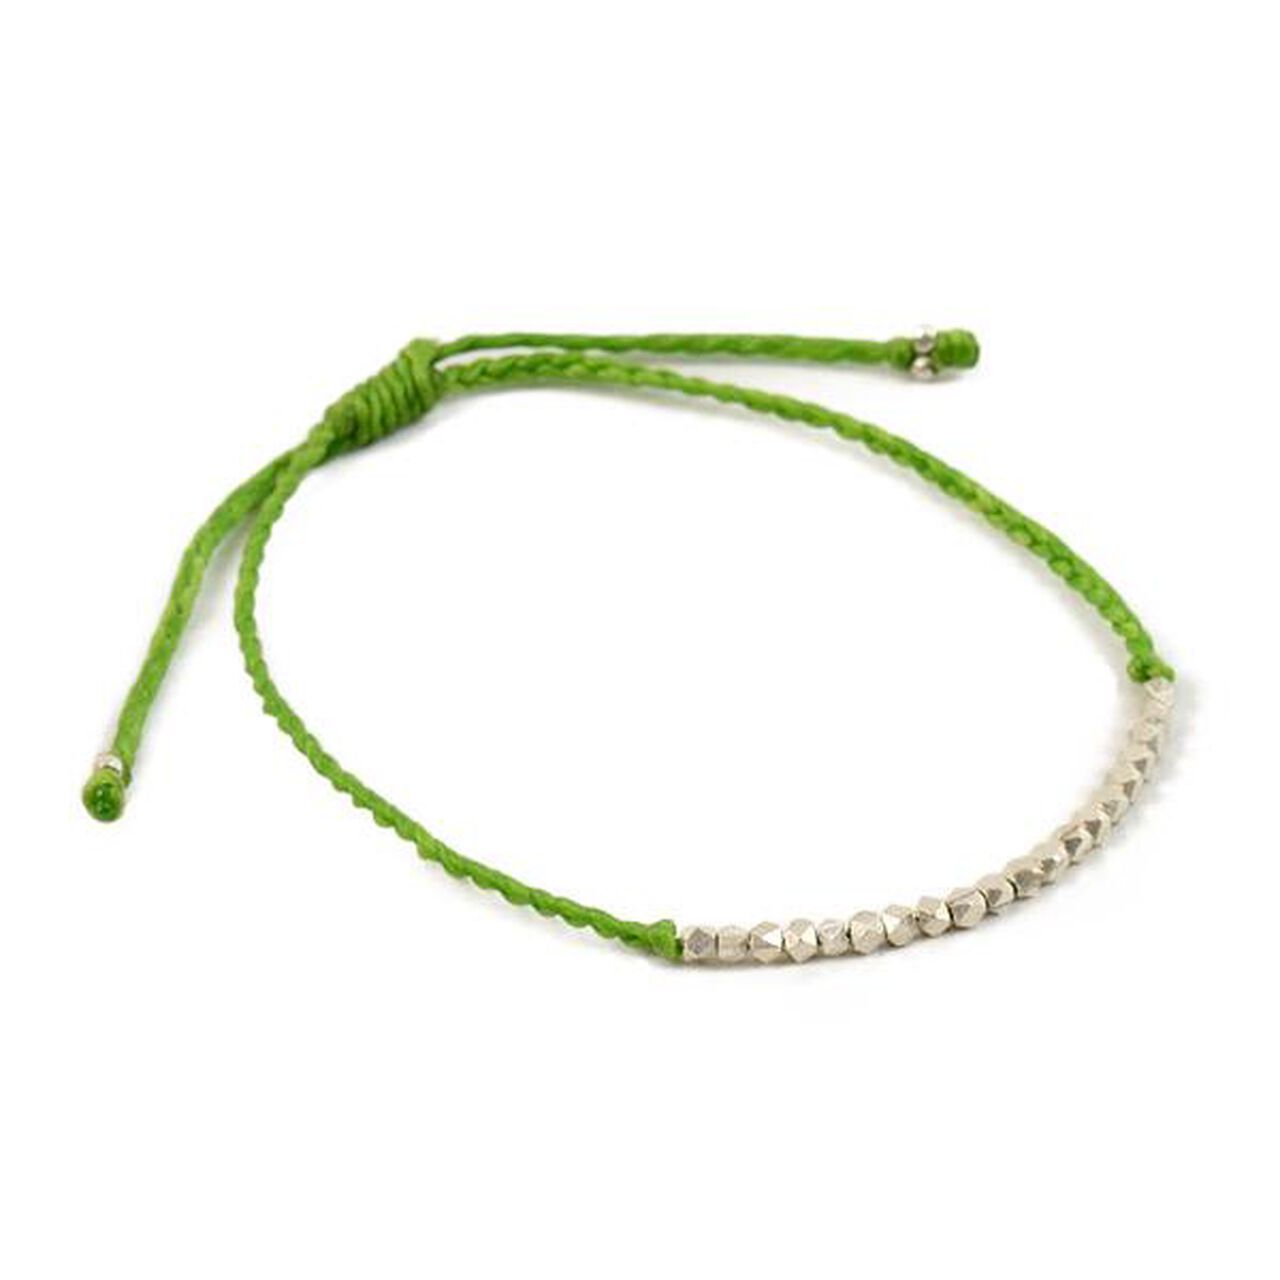 Karen Silver Bead Wax Cord Anklet,Green, large image number 0